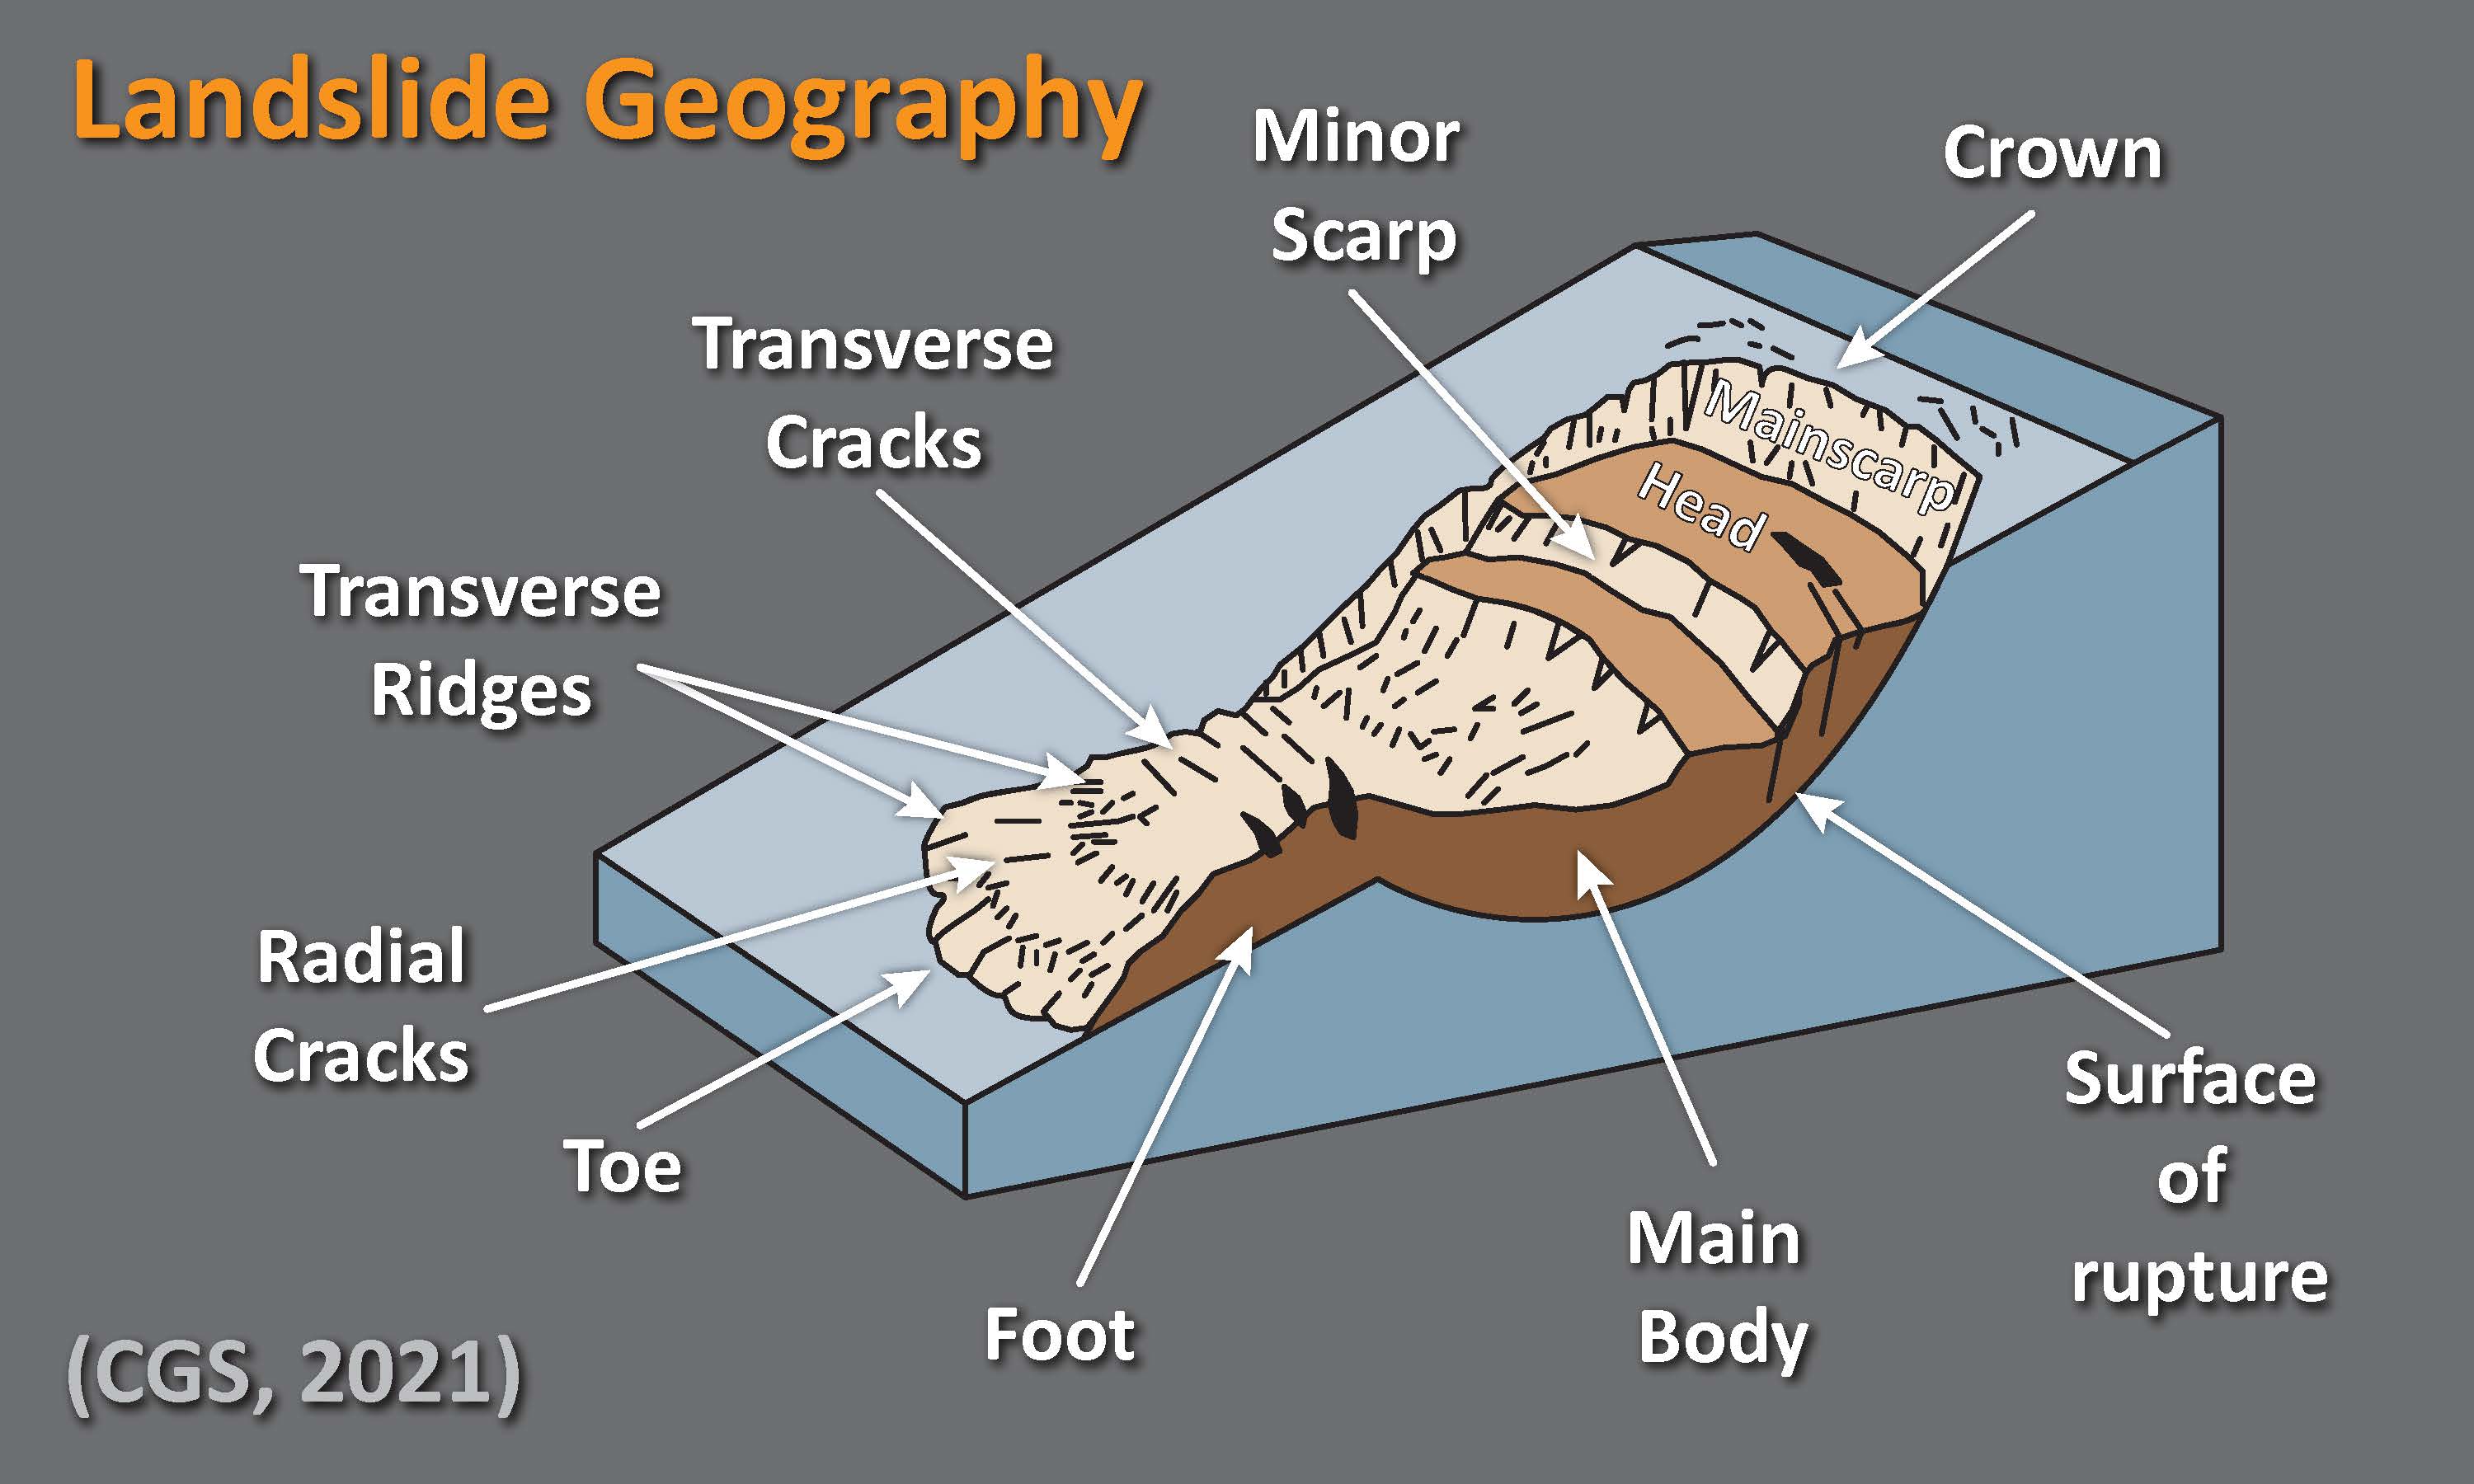 Illustration of a landslide. Characteristic landslide features are labeled, such as the surface of rupture, head, main body, and toe. The body of the landslide slips down along the surface of rupture.